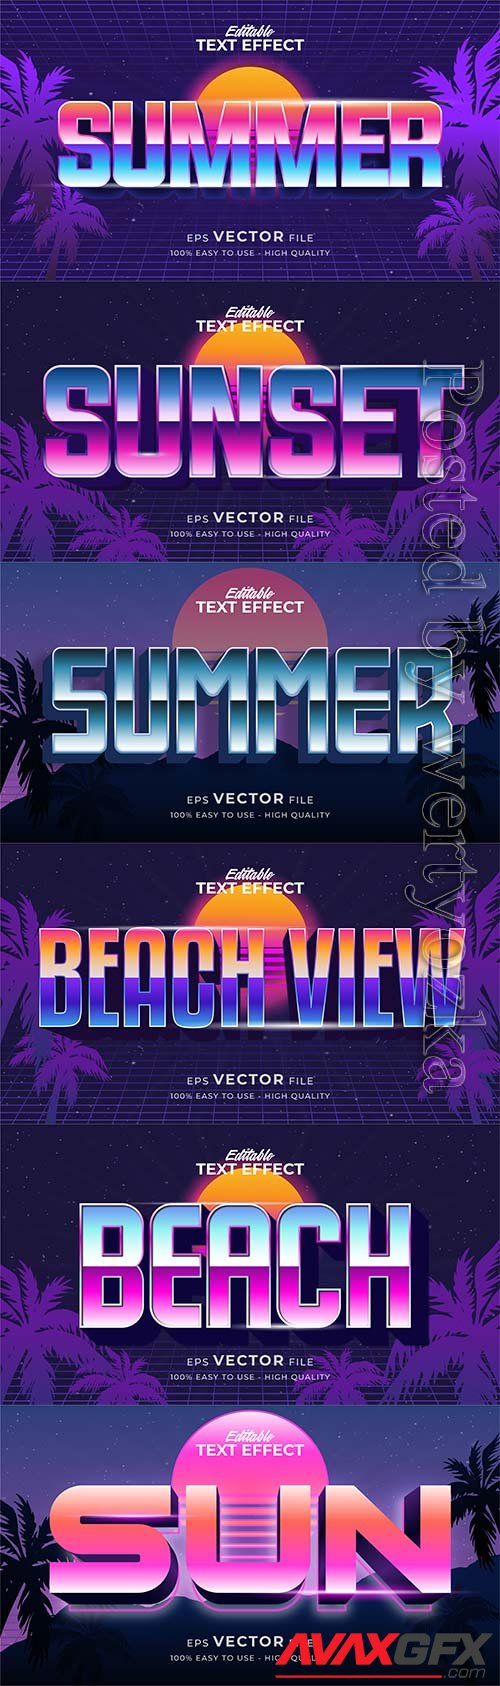 Text style effect, retro summer text in grunge style vol 4